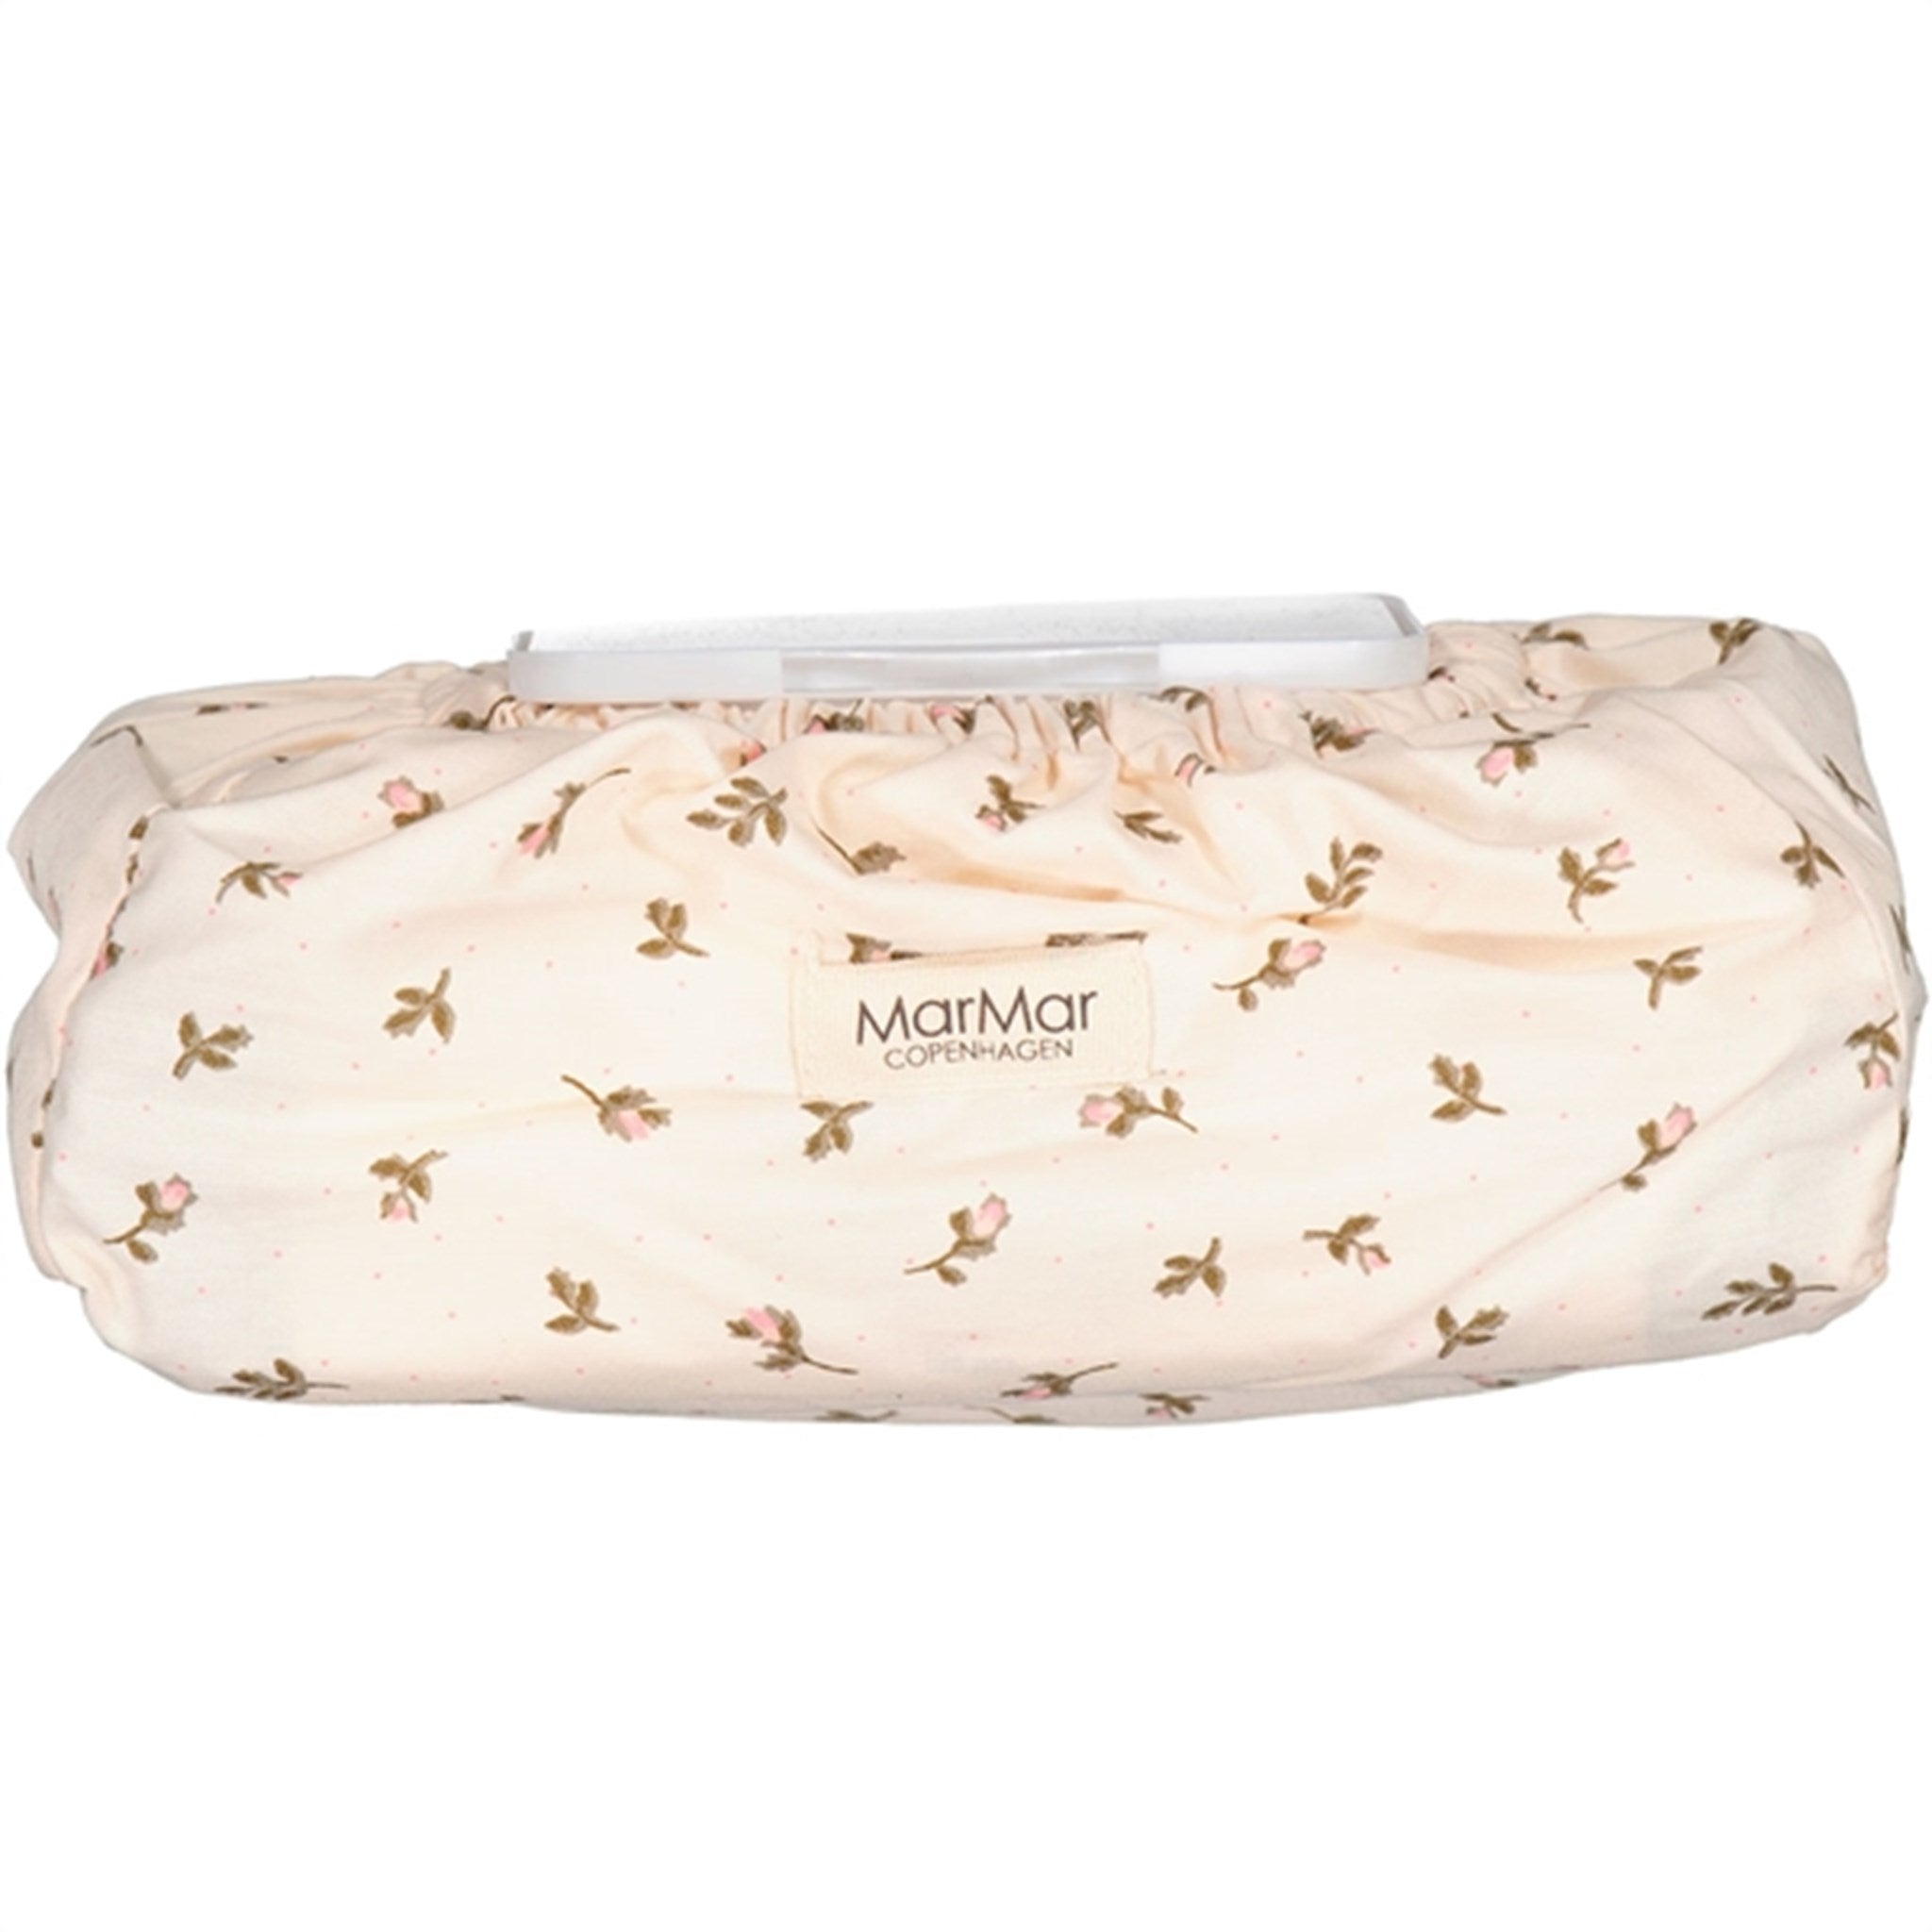 MarMar Wet Wipe Cover Little Rose 3